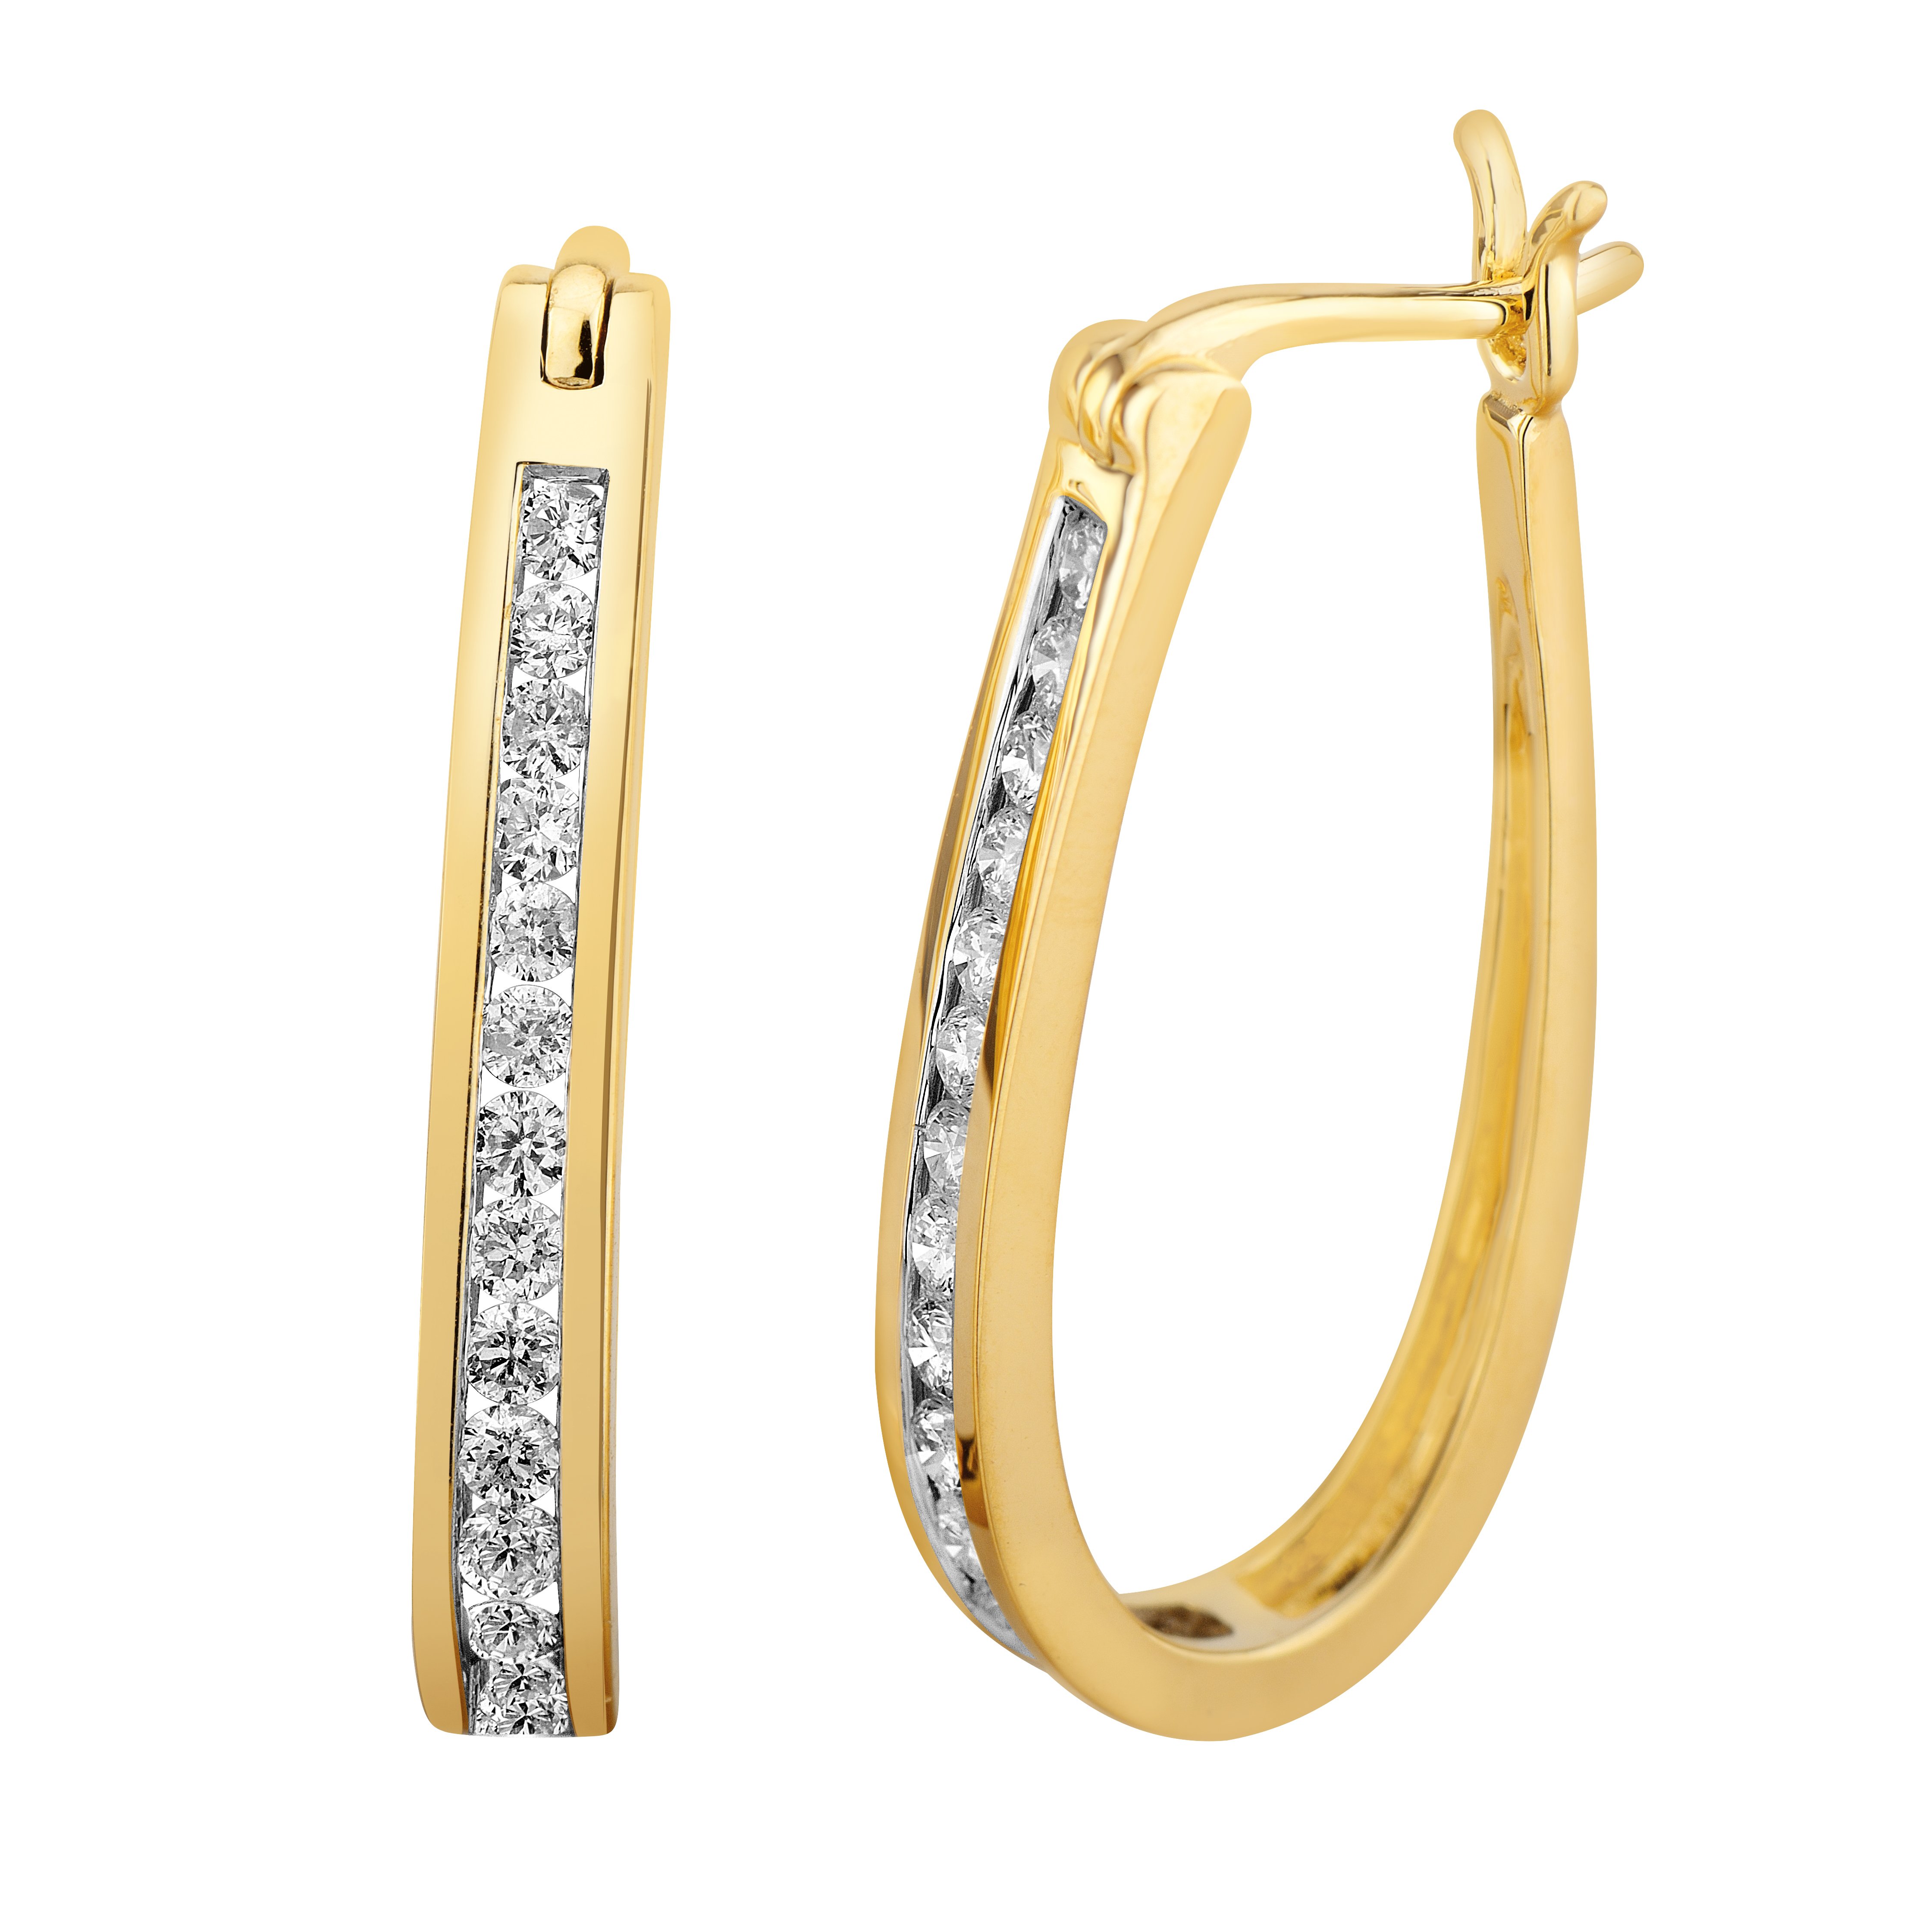 9ct Yellow Gold 1/2 Carat Chanel Set Hoop Earrings with 28 Brilliant Diamonds